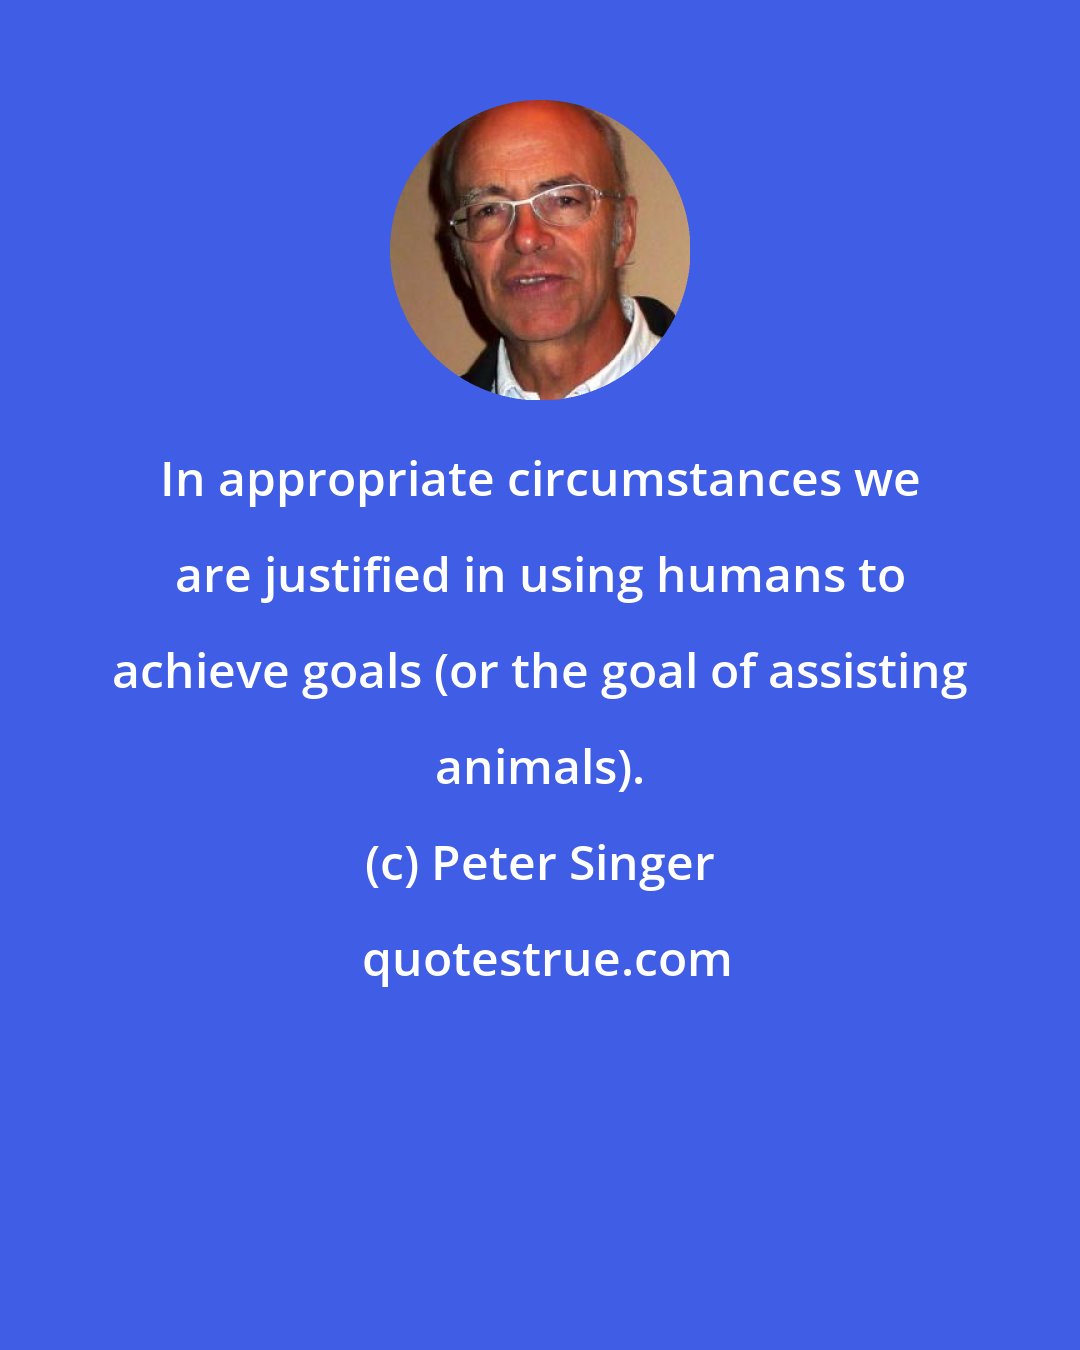 Peter Singer: In appropriate circumstances we are justified in using humans to achieve goals (or the goal of assisting animals).